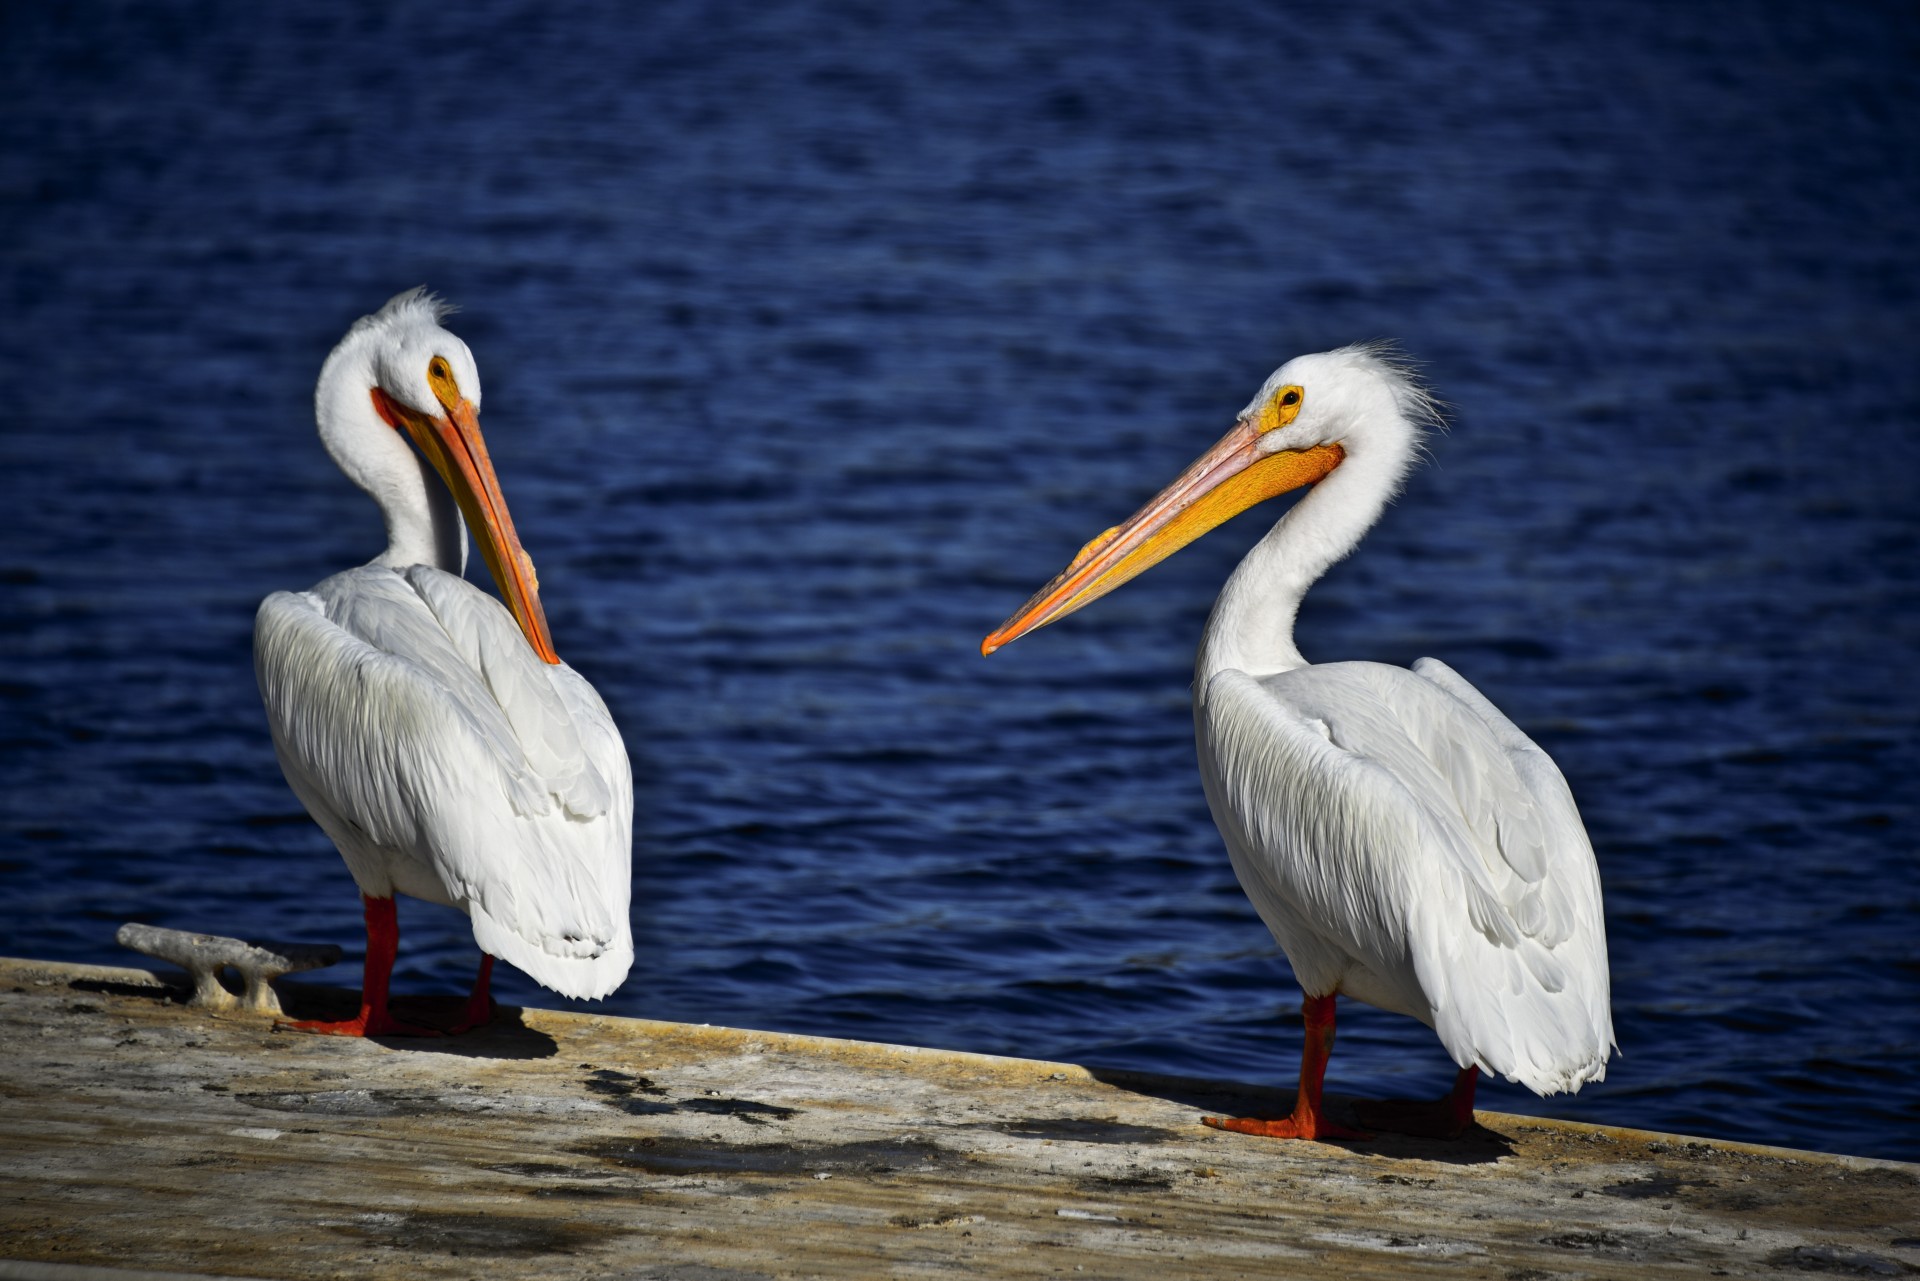 On a dock of the lake, two adult white pelicans look toward each other overlooking a blue lake water